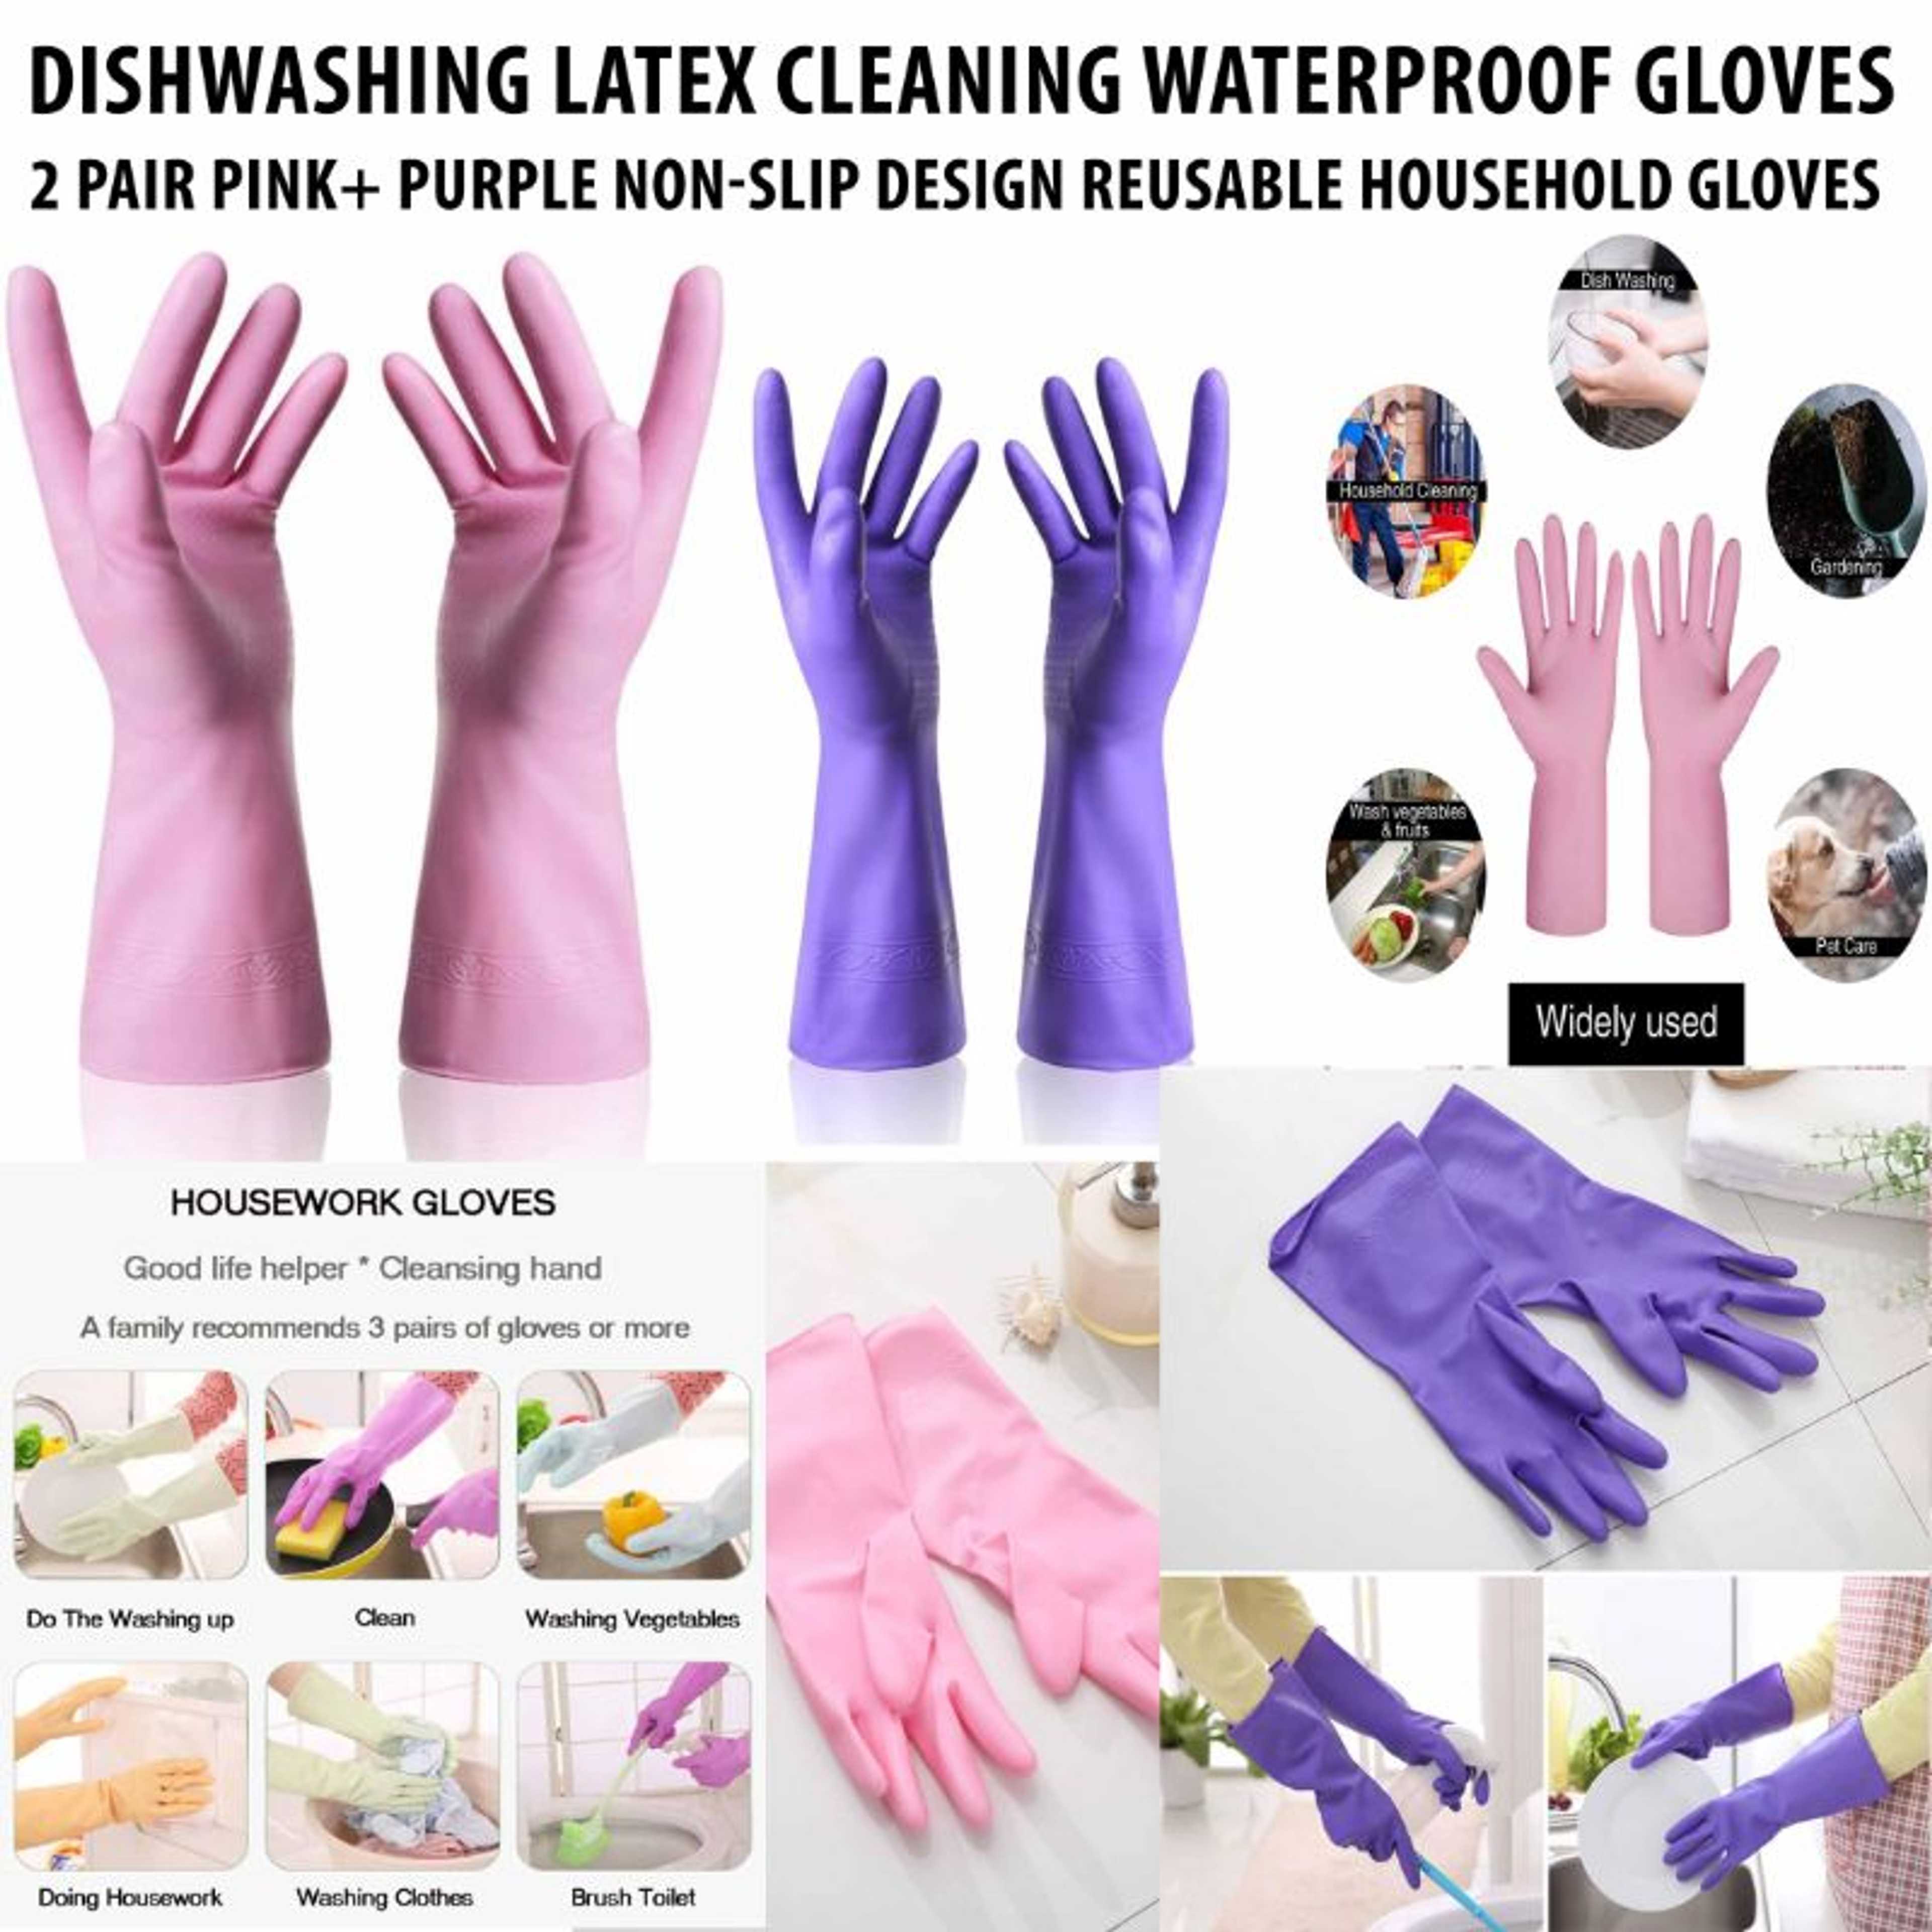 Pack of 2 Rubber Washing Gloves Multicolored 2 Pairs Pink and Purple